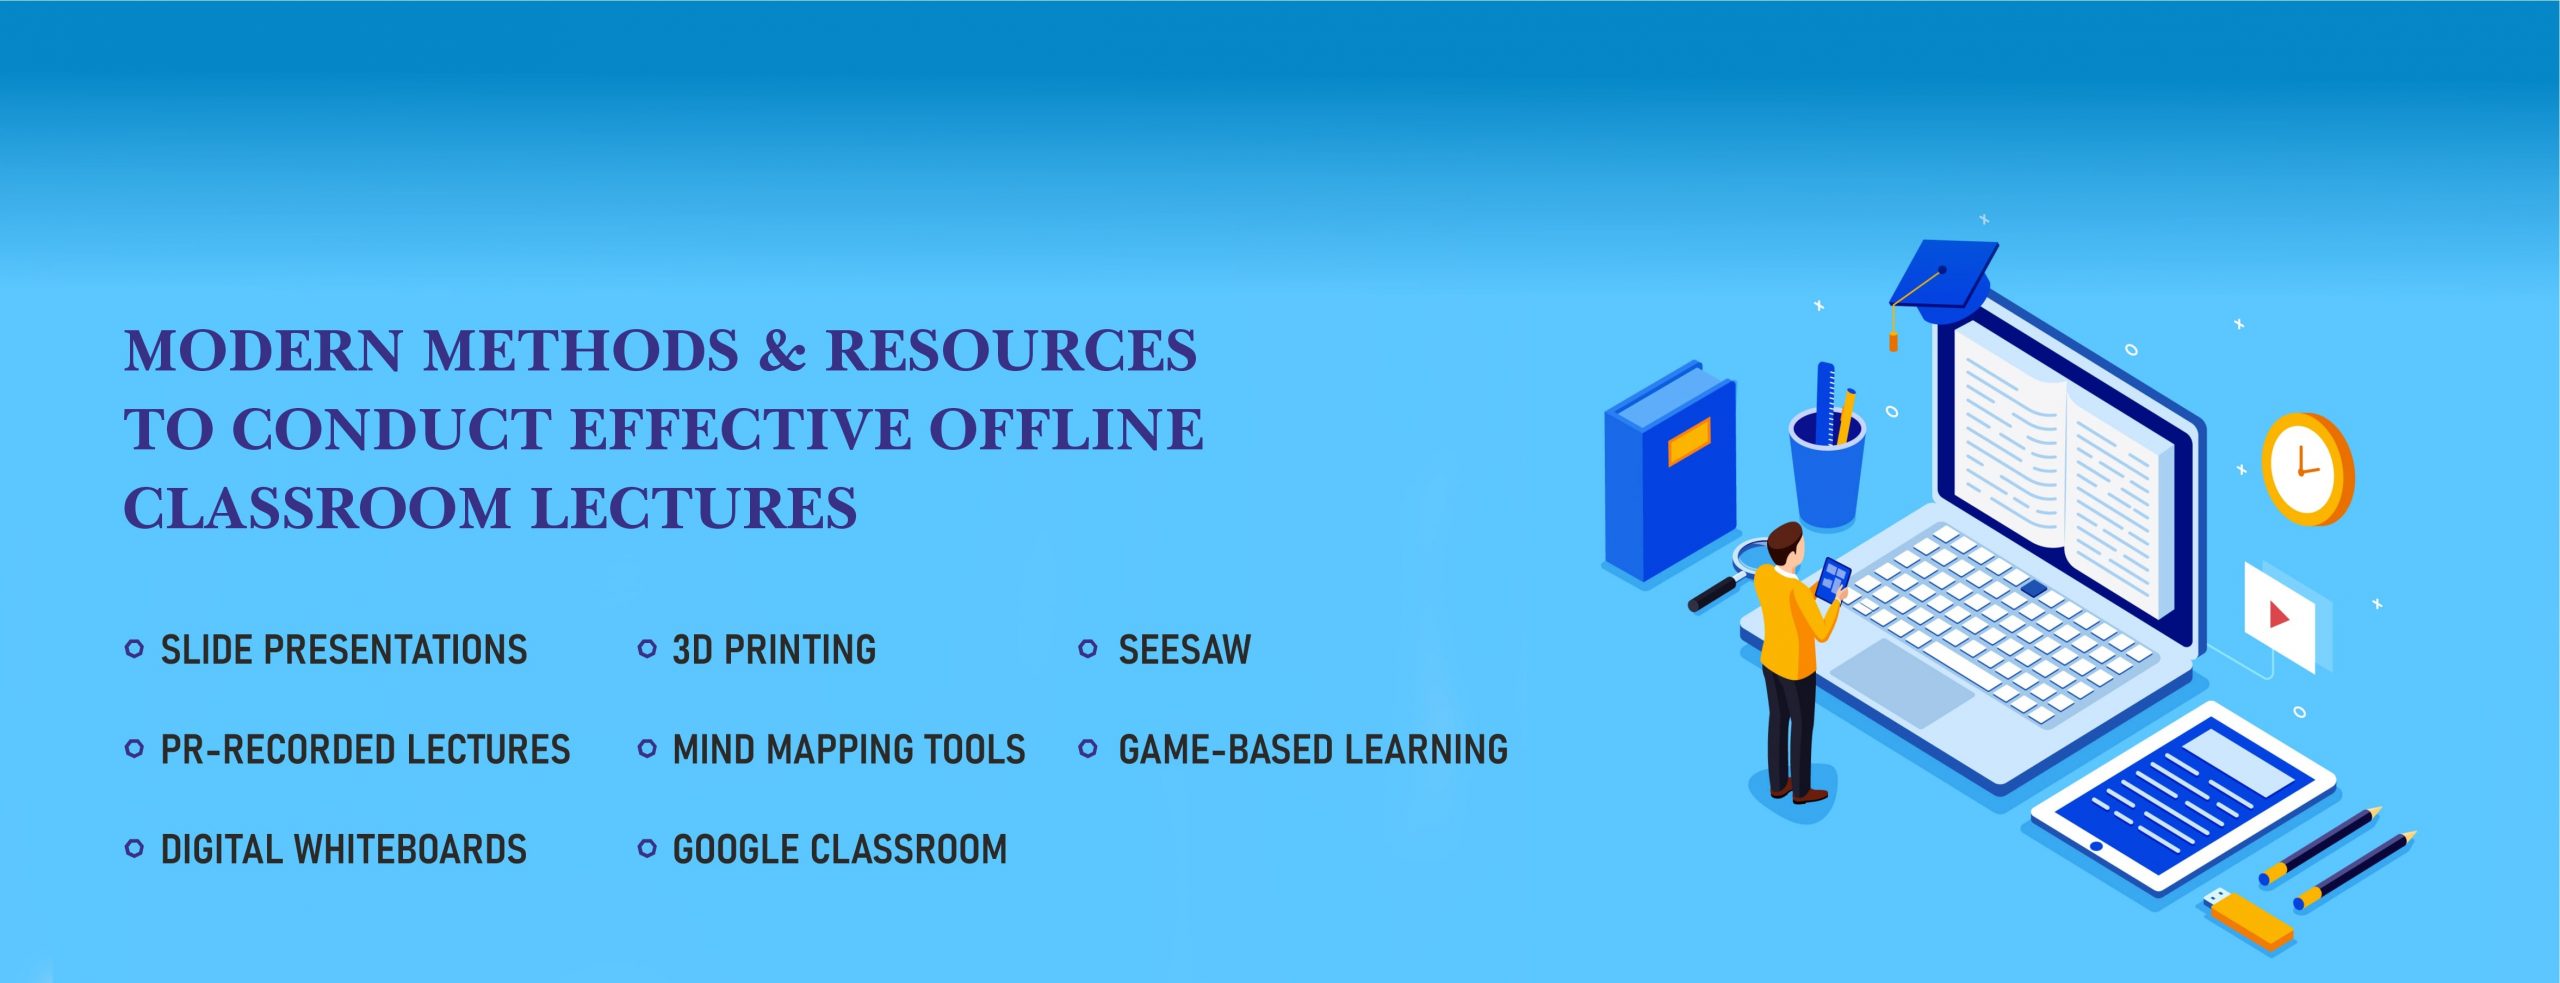 Modern methods and resources to conduct effective offline classroom lectures